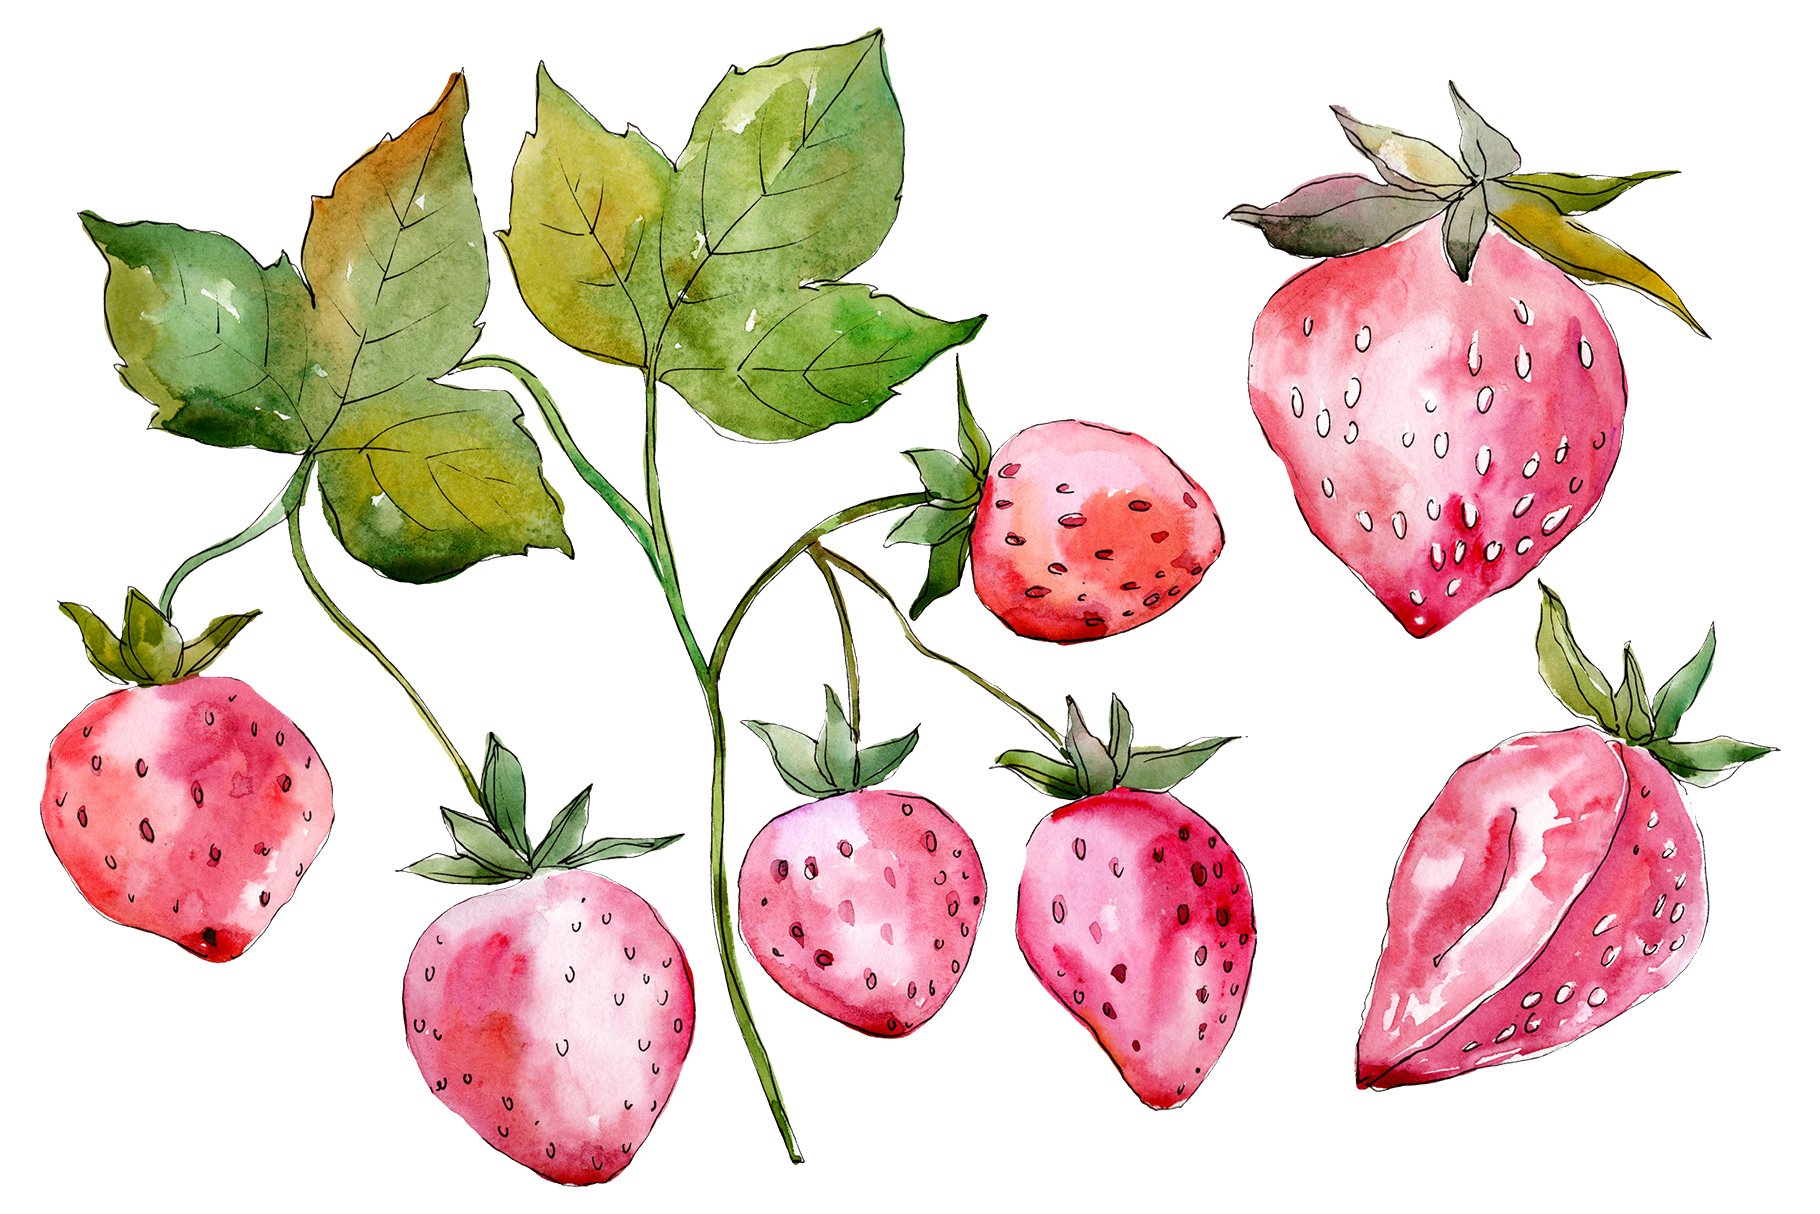 Watercolor strawberries on a white background.